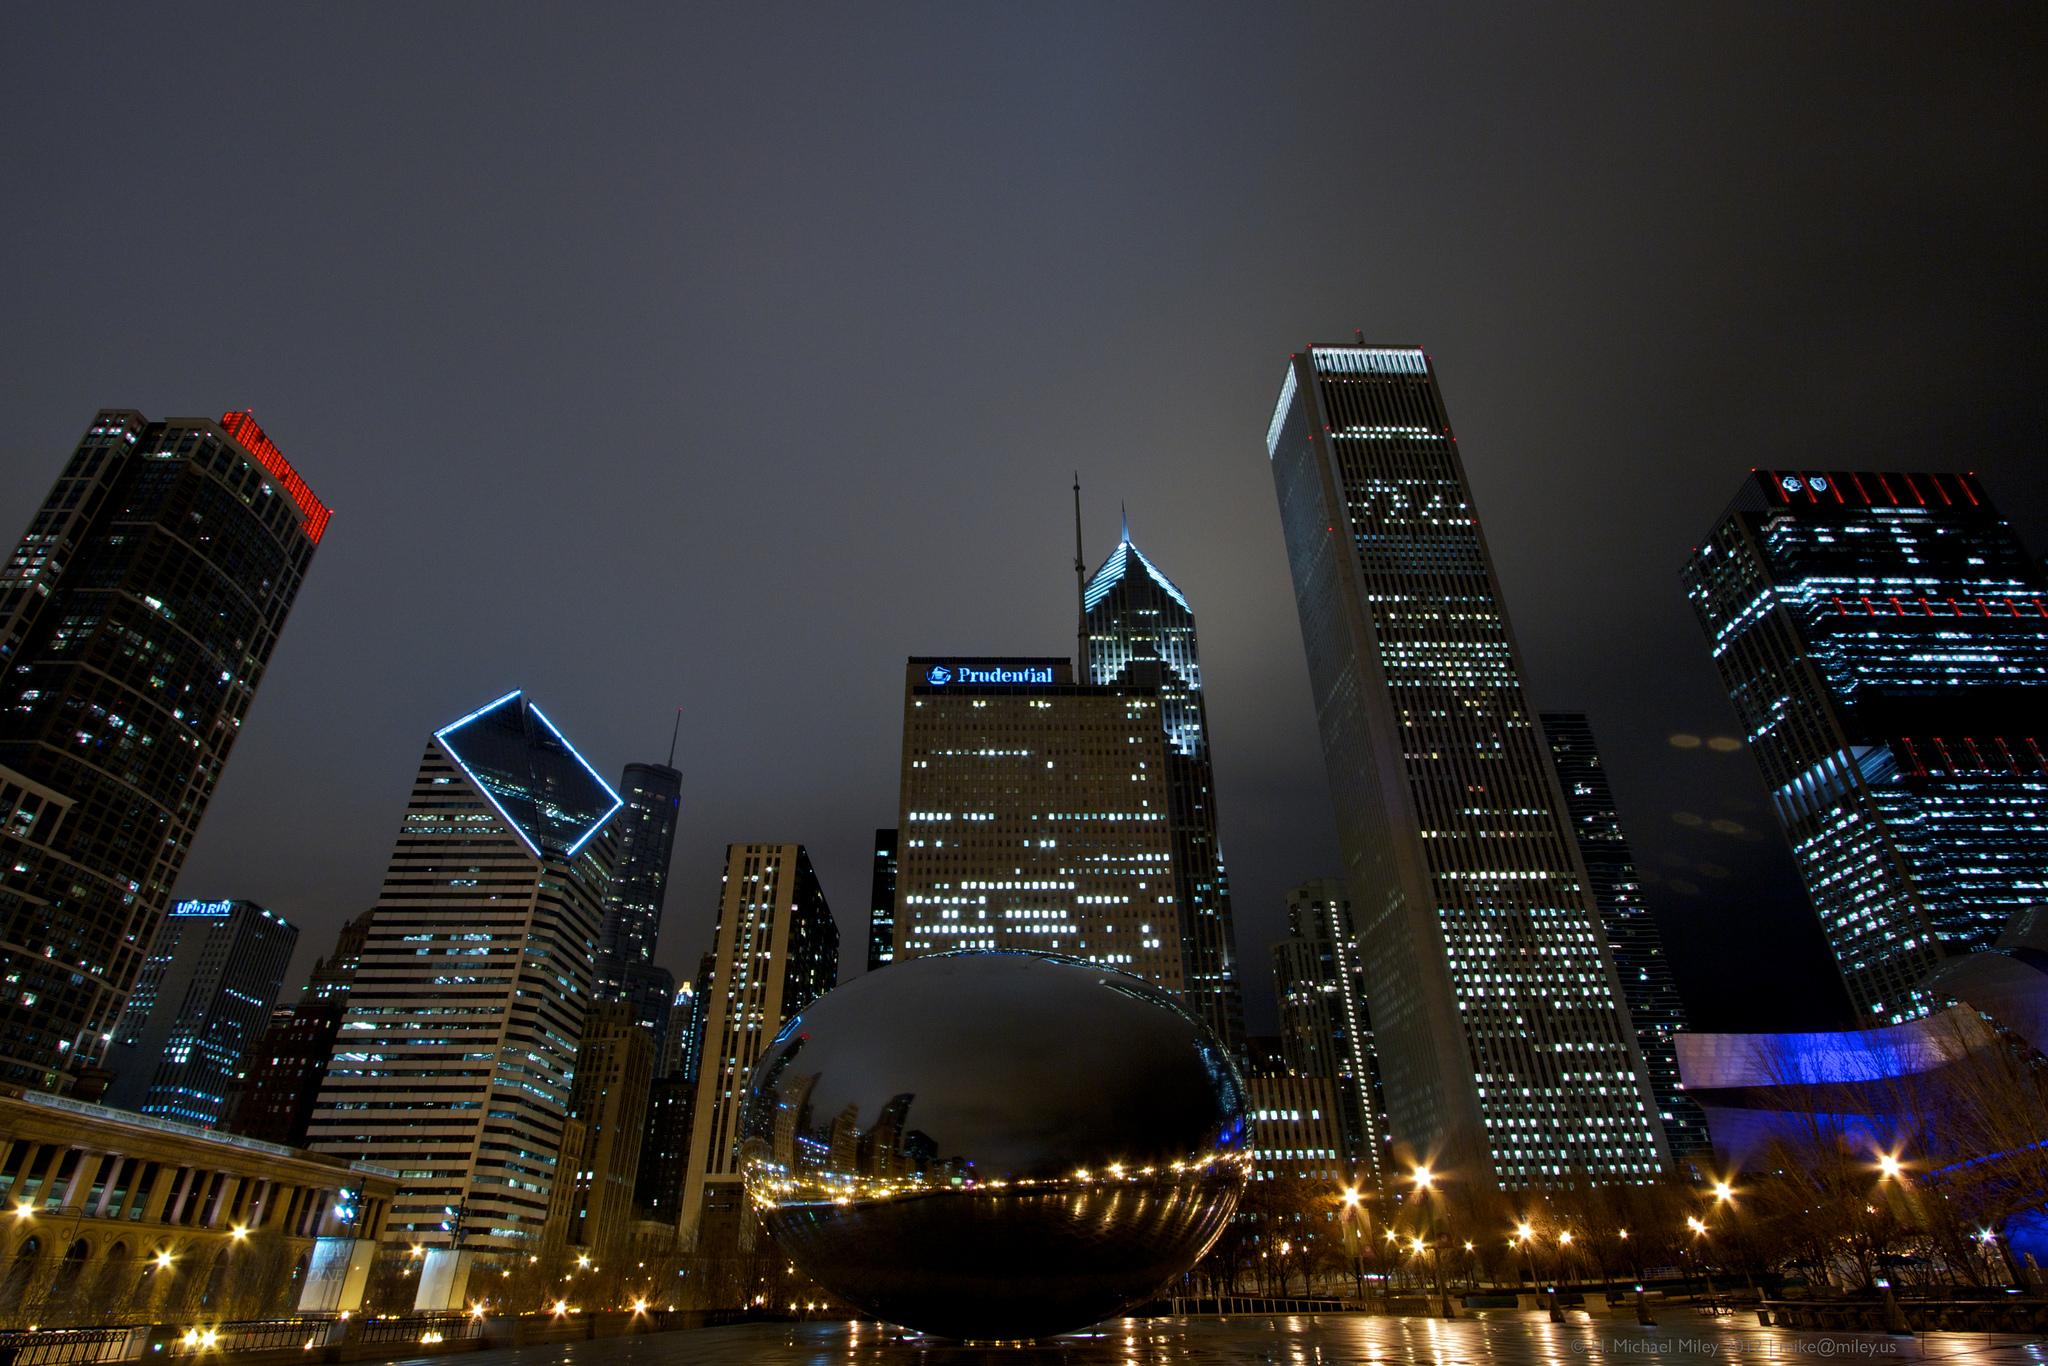 General 2048x1366 city city lights night reflection Chicago watermarked